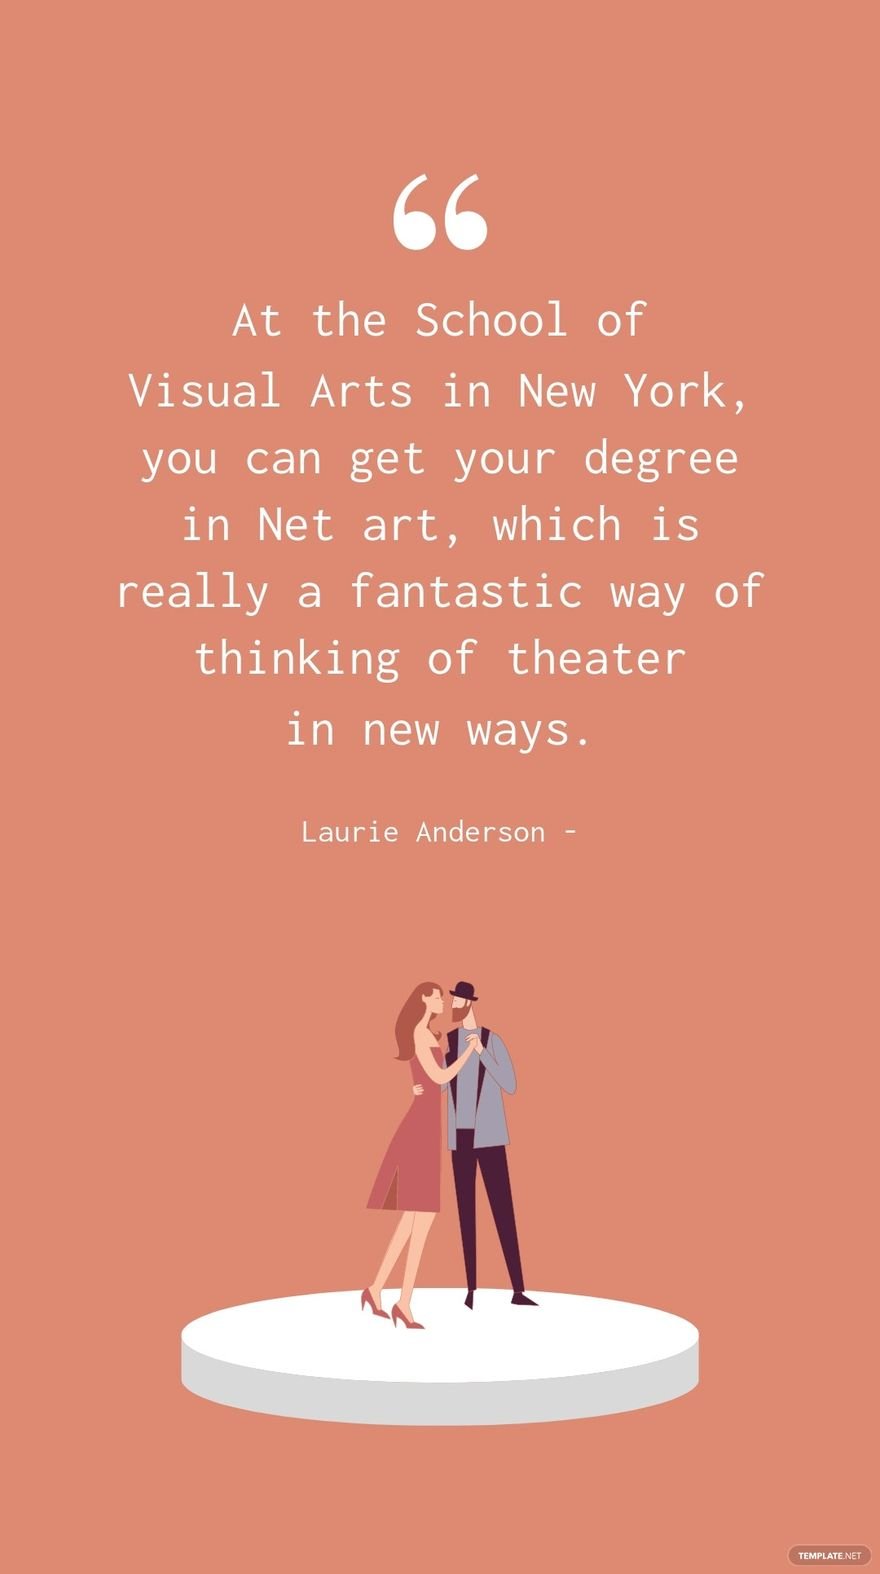 Laurie Anderson - At the School of Visual Arts in New York, you can get your degree in Net art, which is really a fantastic way of thinking of theater in new ways. in JPG